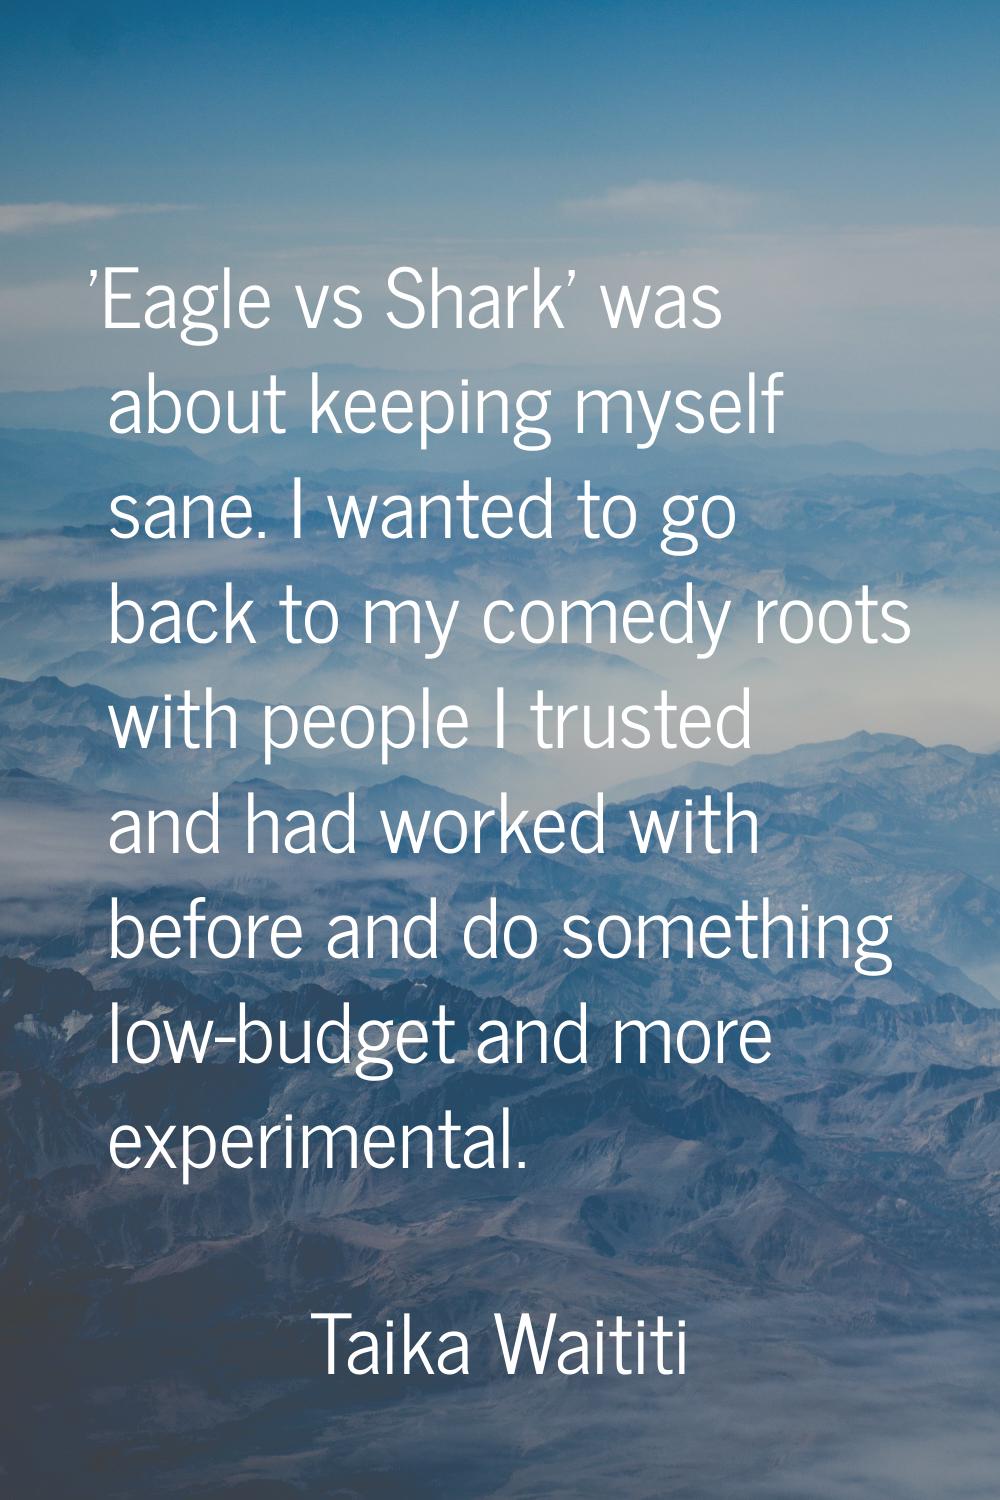 'Eagle vs Shark' was about keeping myself sane. I wanted to go back to my comedy roots with people 